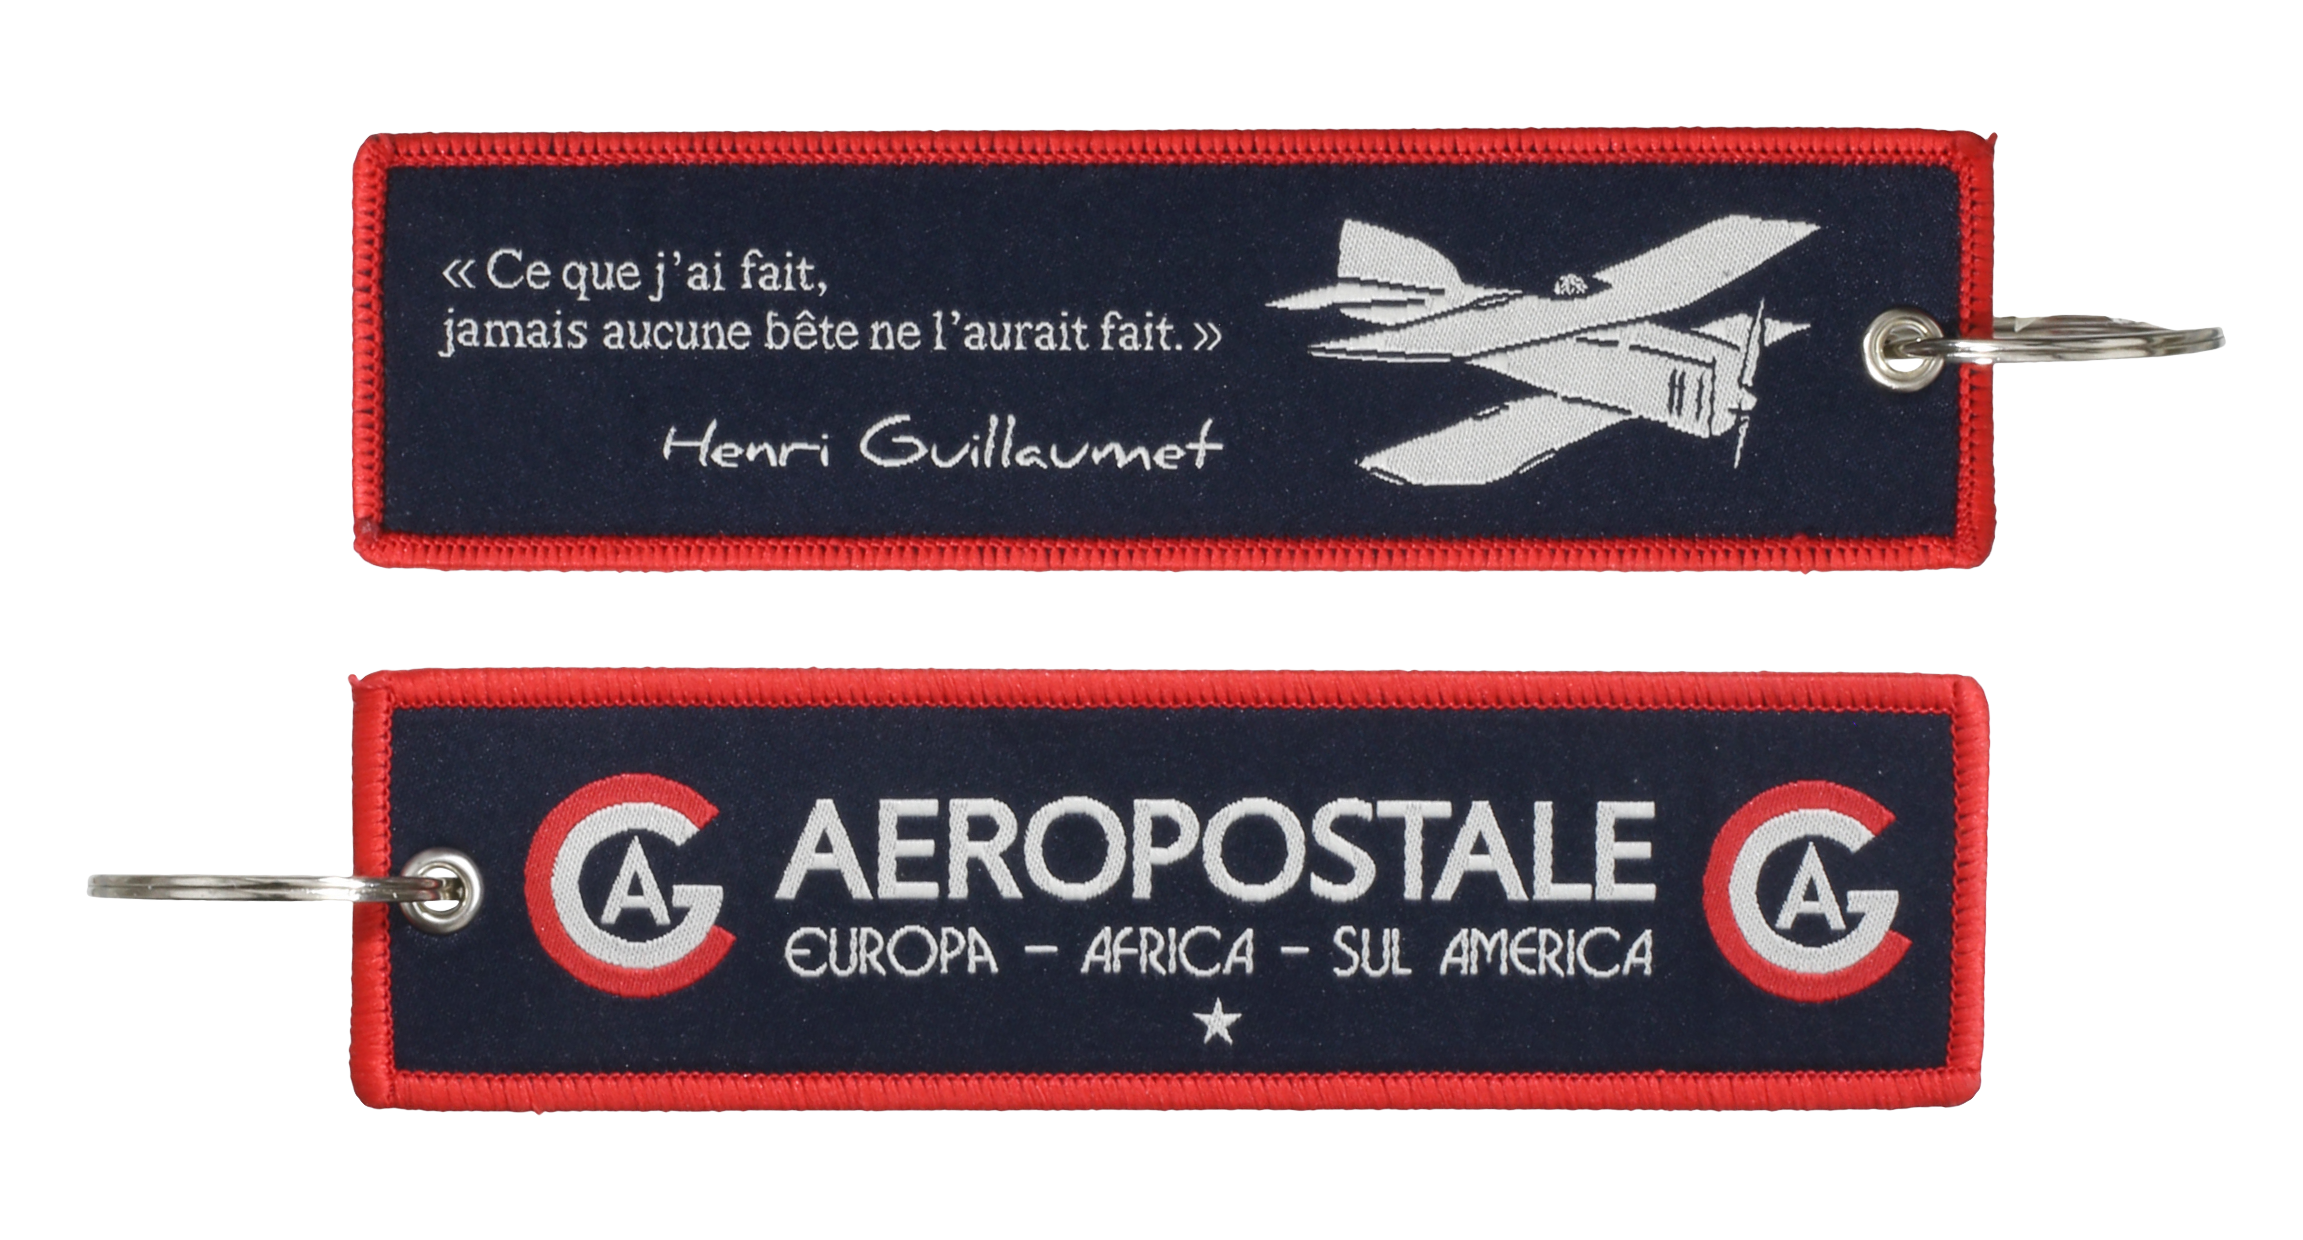 Air France Legend Aéropostale Guillaumet flame key ring, what I did...